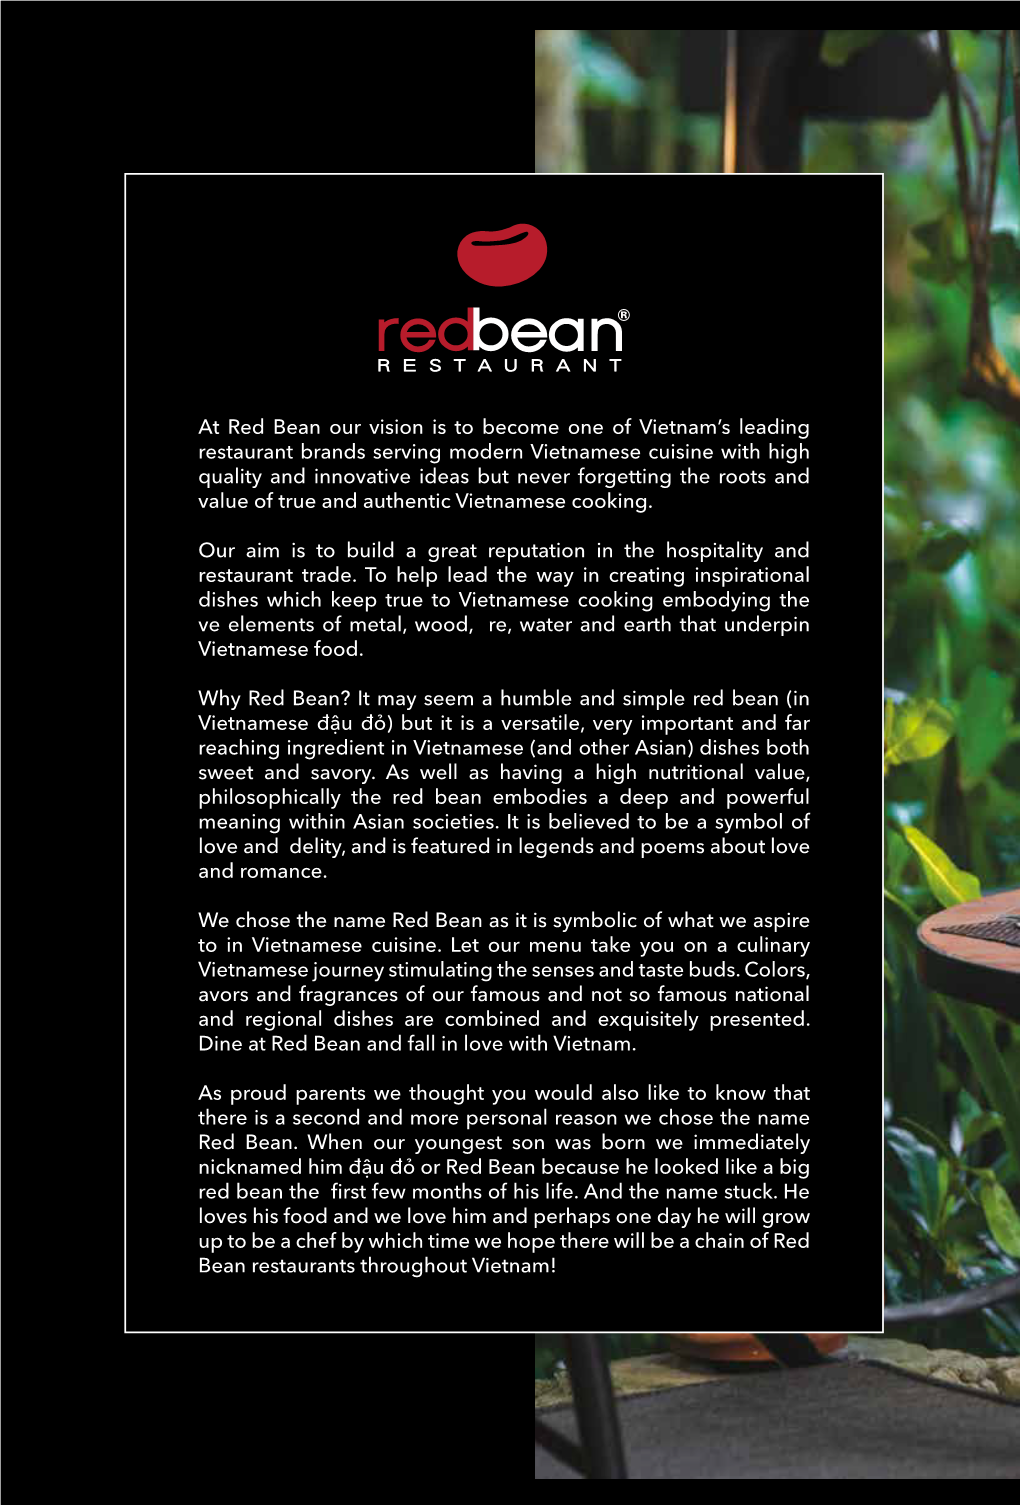 At Red Bean Our Vision Is to Become One of Vietnam's Leading Restaurant